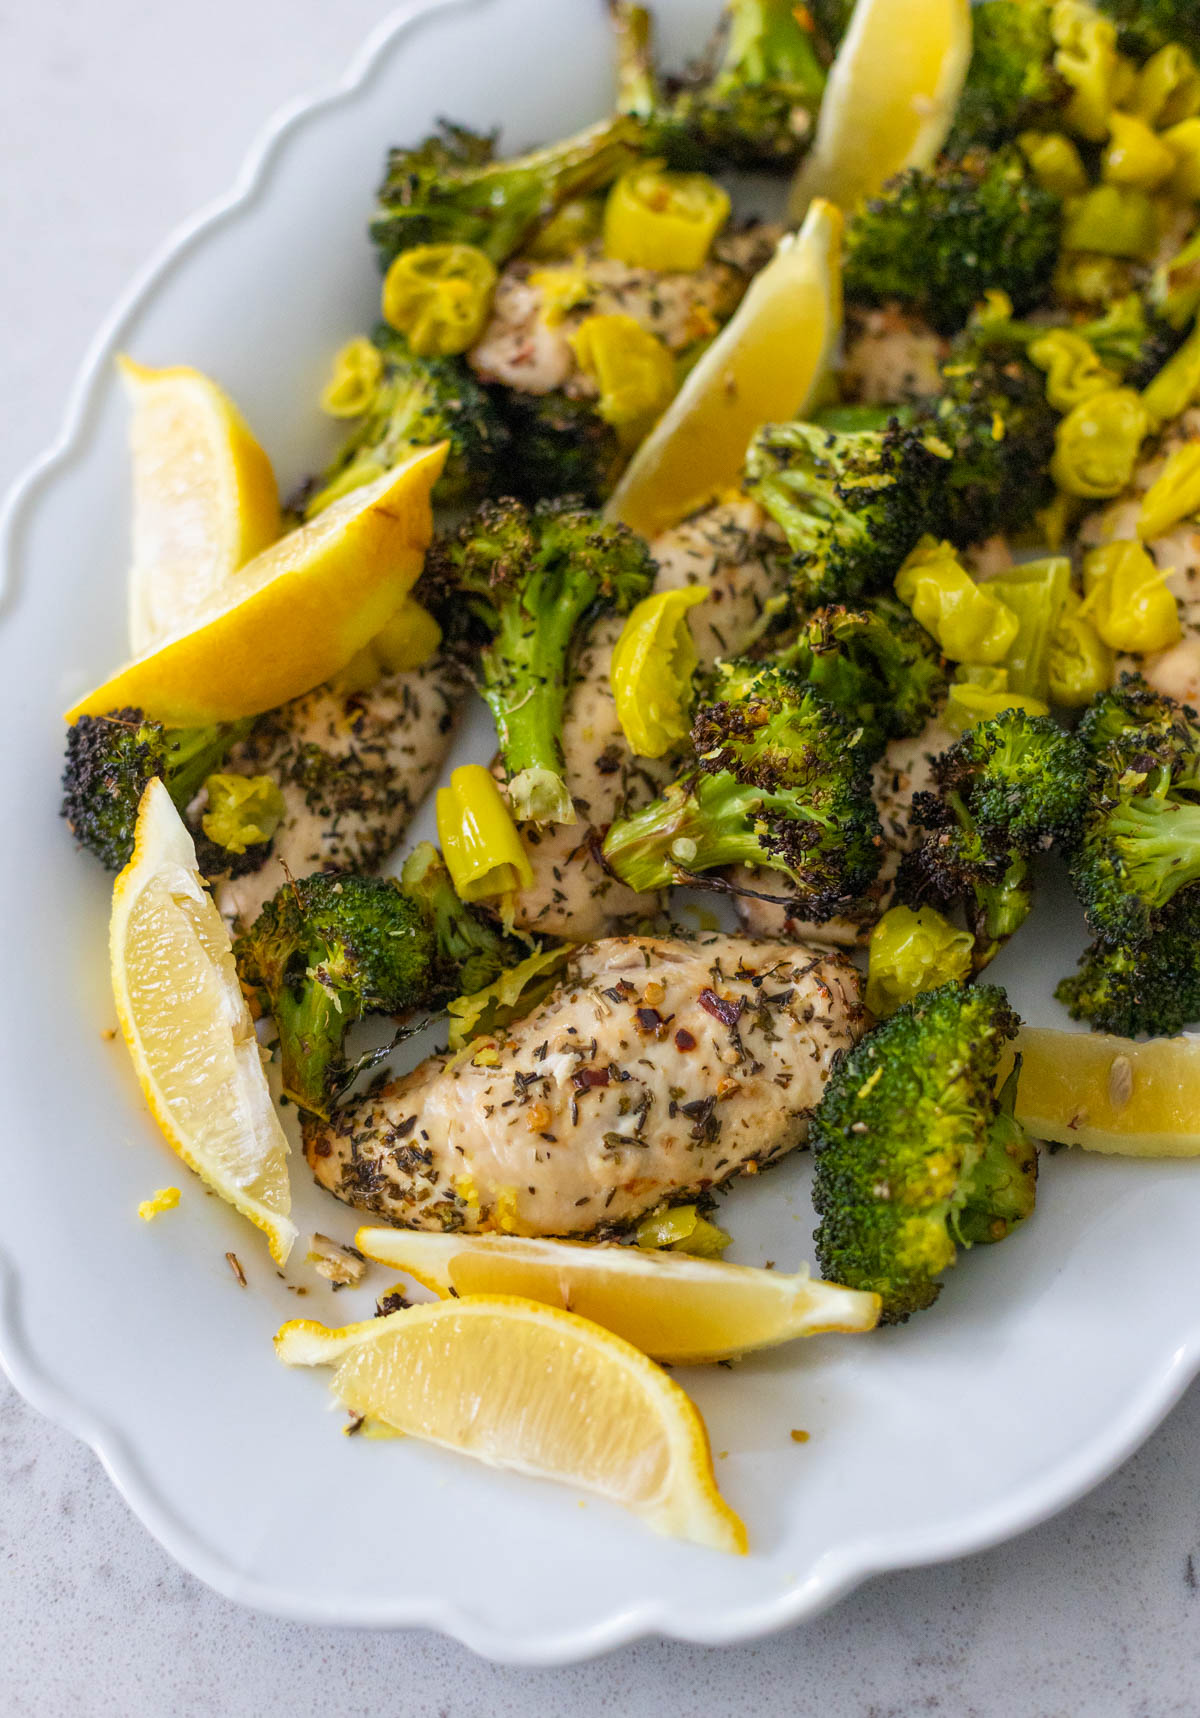 The white platter is filled with chicken, broccoli, and lemon wedges.